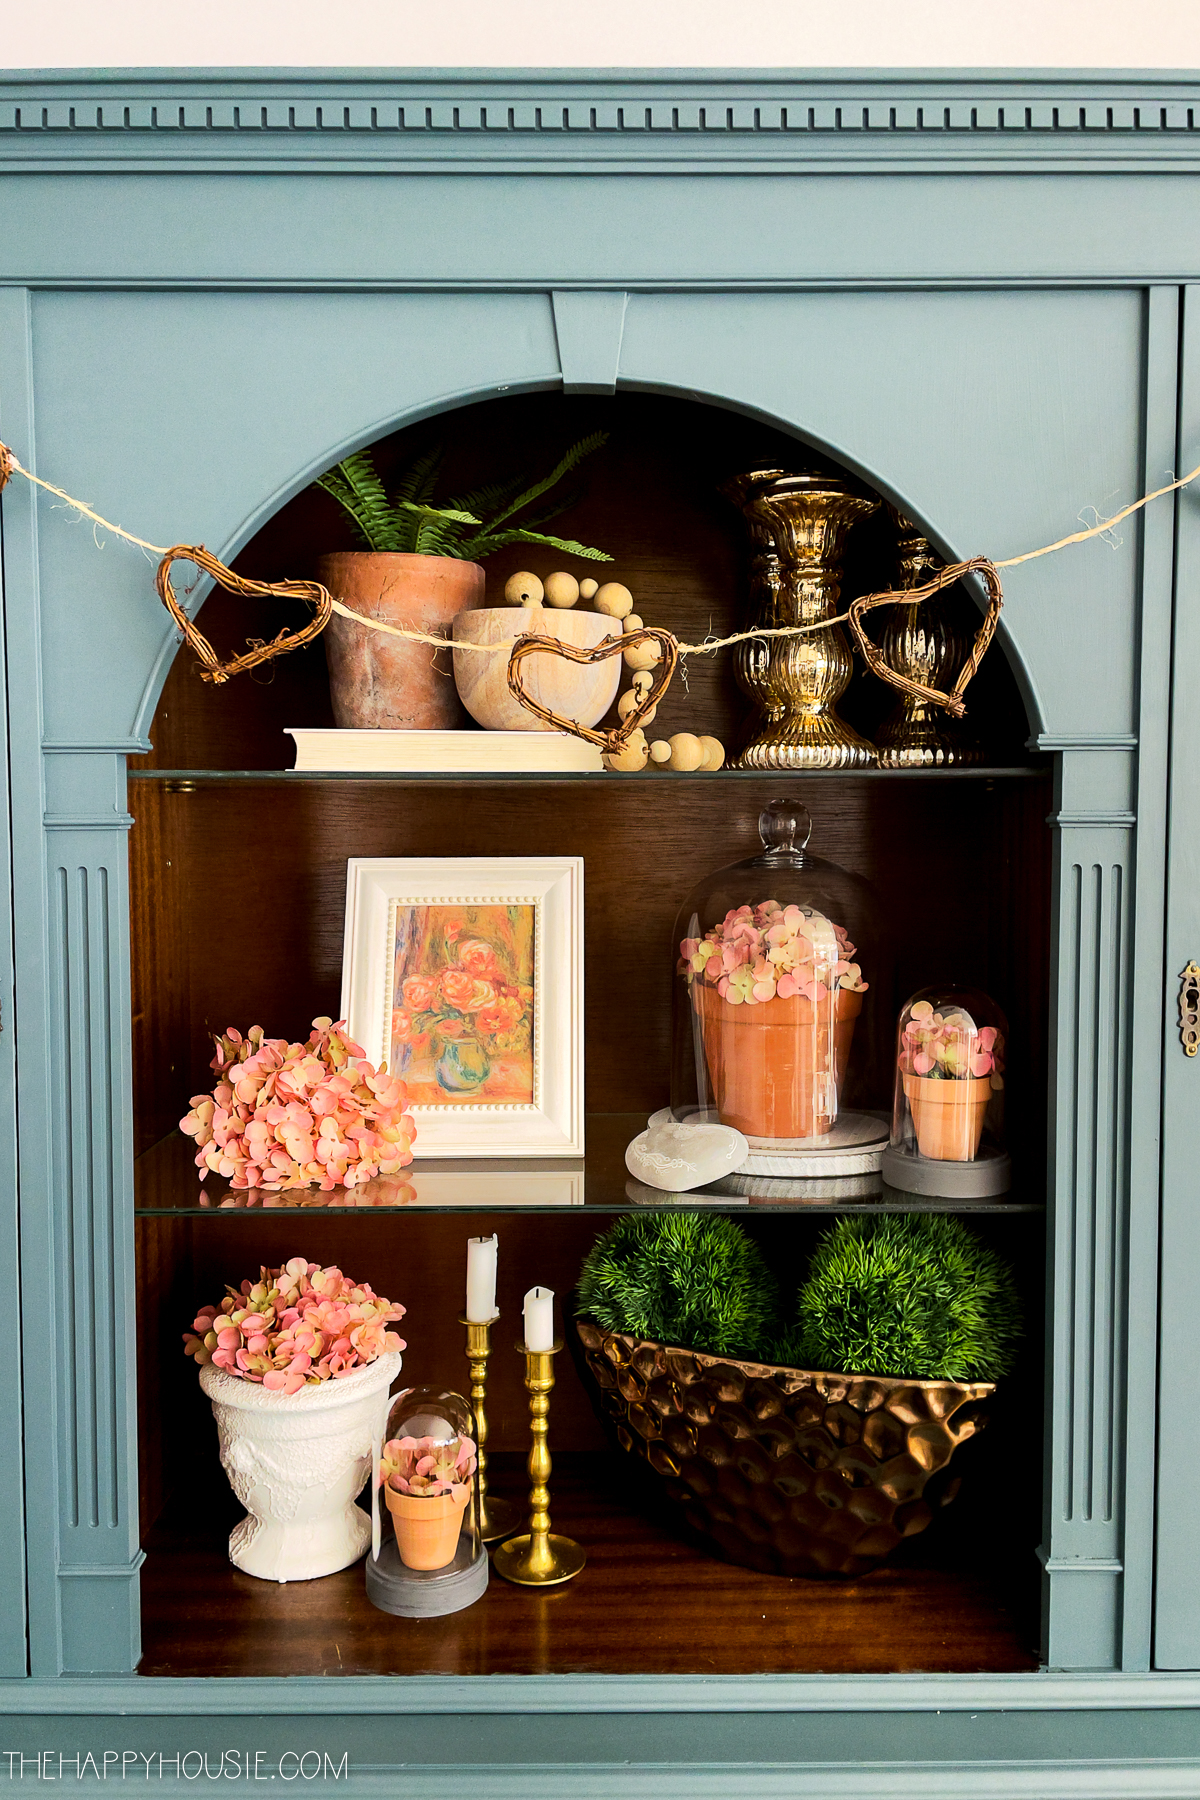 A wooden hutch with classy Valentine's Day decor items.